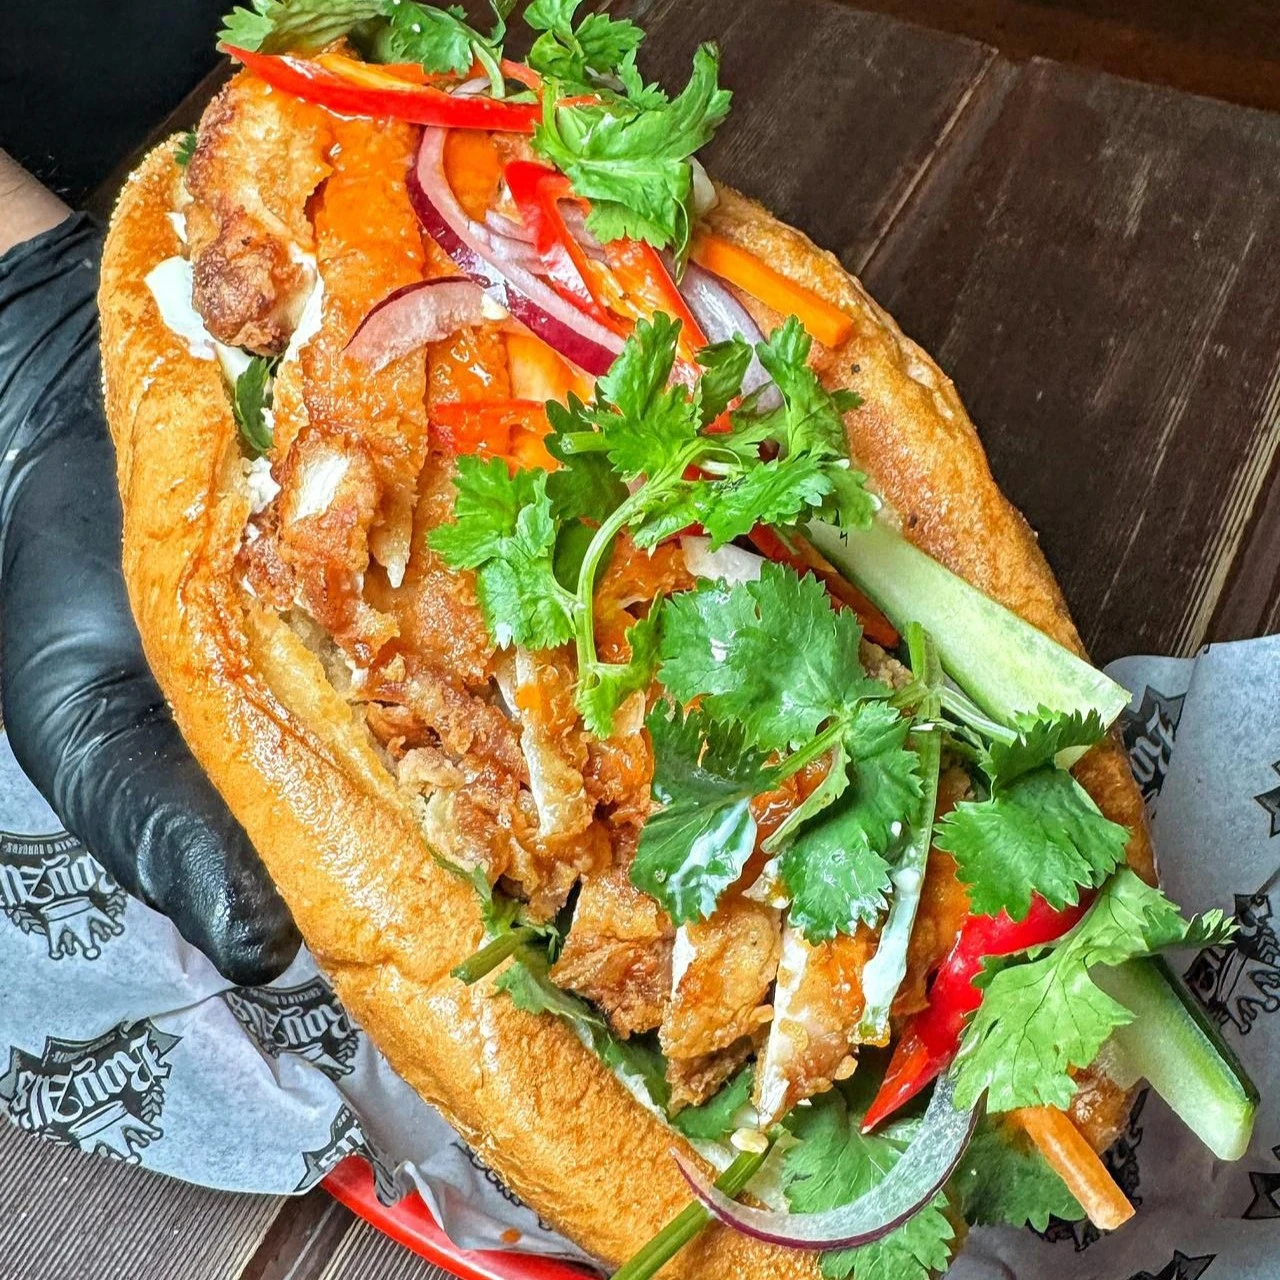 RoyAl's Chicken and Burgers Burger of the Week: Buttermilk Banh Mi